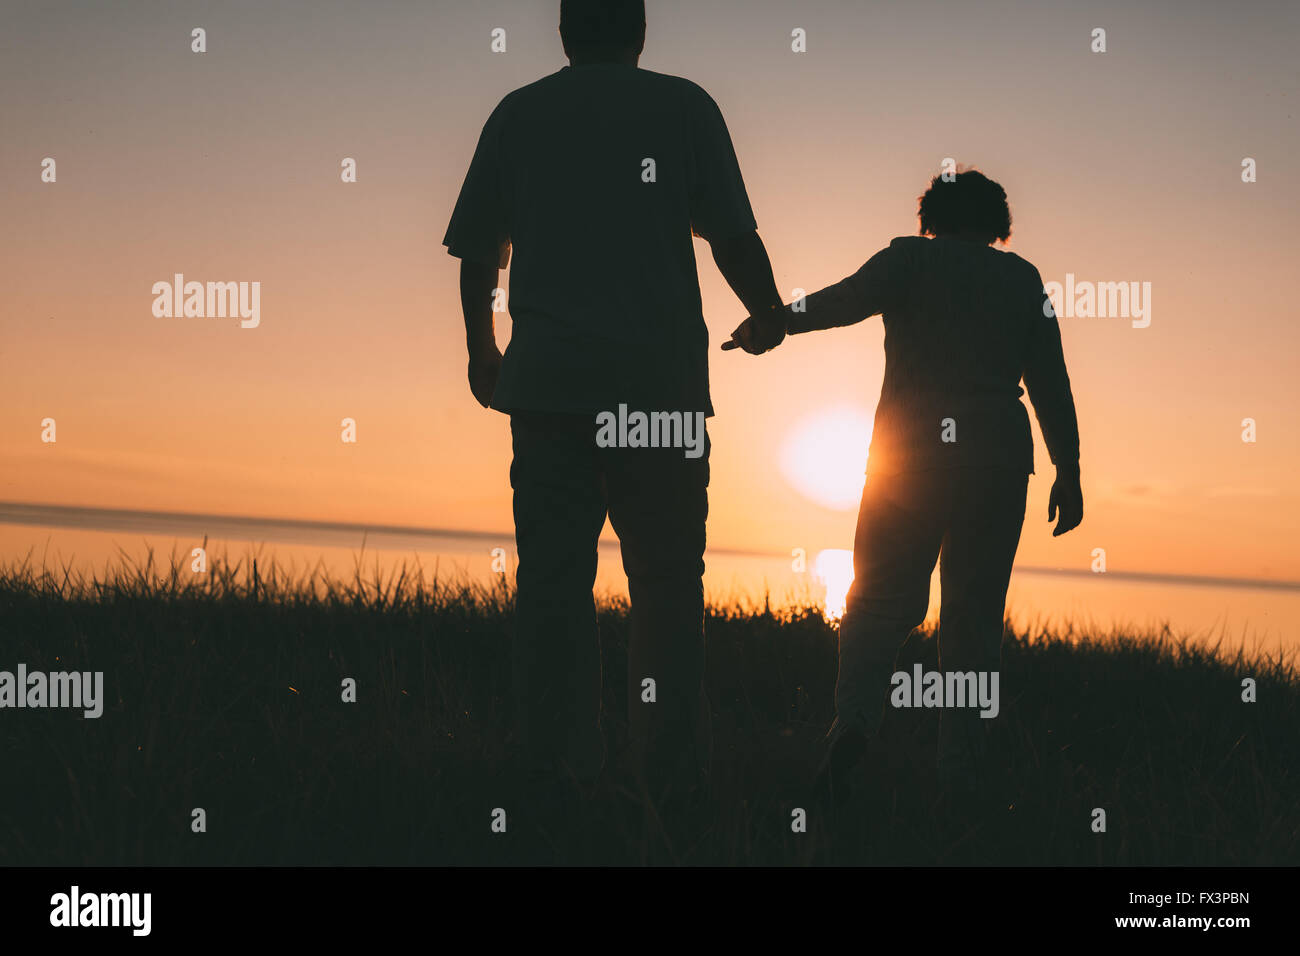 Adult couple silhouettes at sunset. Stock Photo